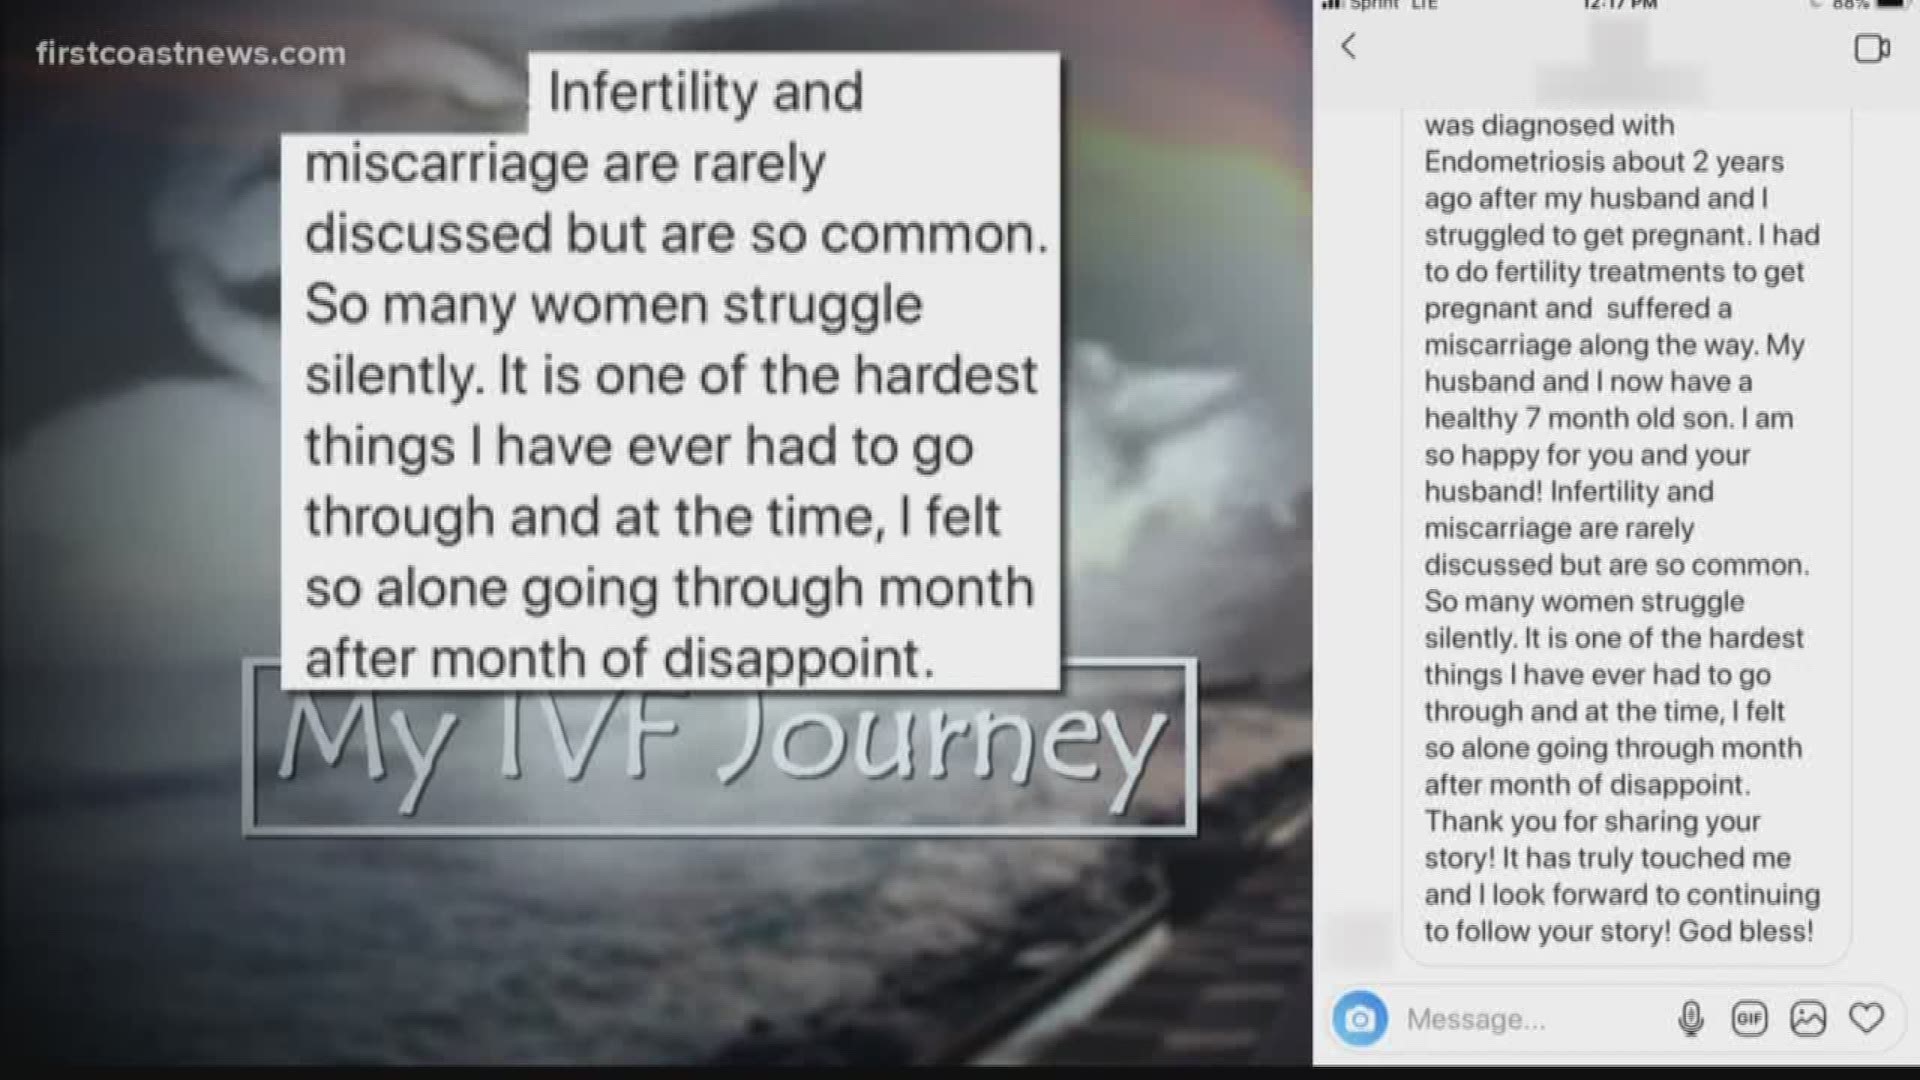 First Coast News is delving into an issue that many couples don’t often talk about openly; infertility.